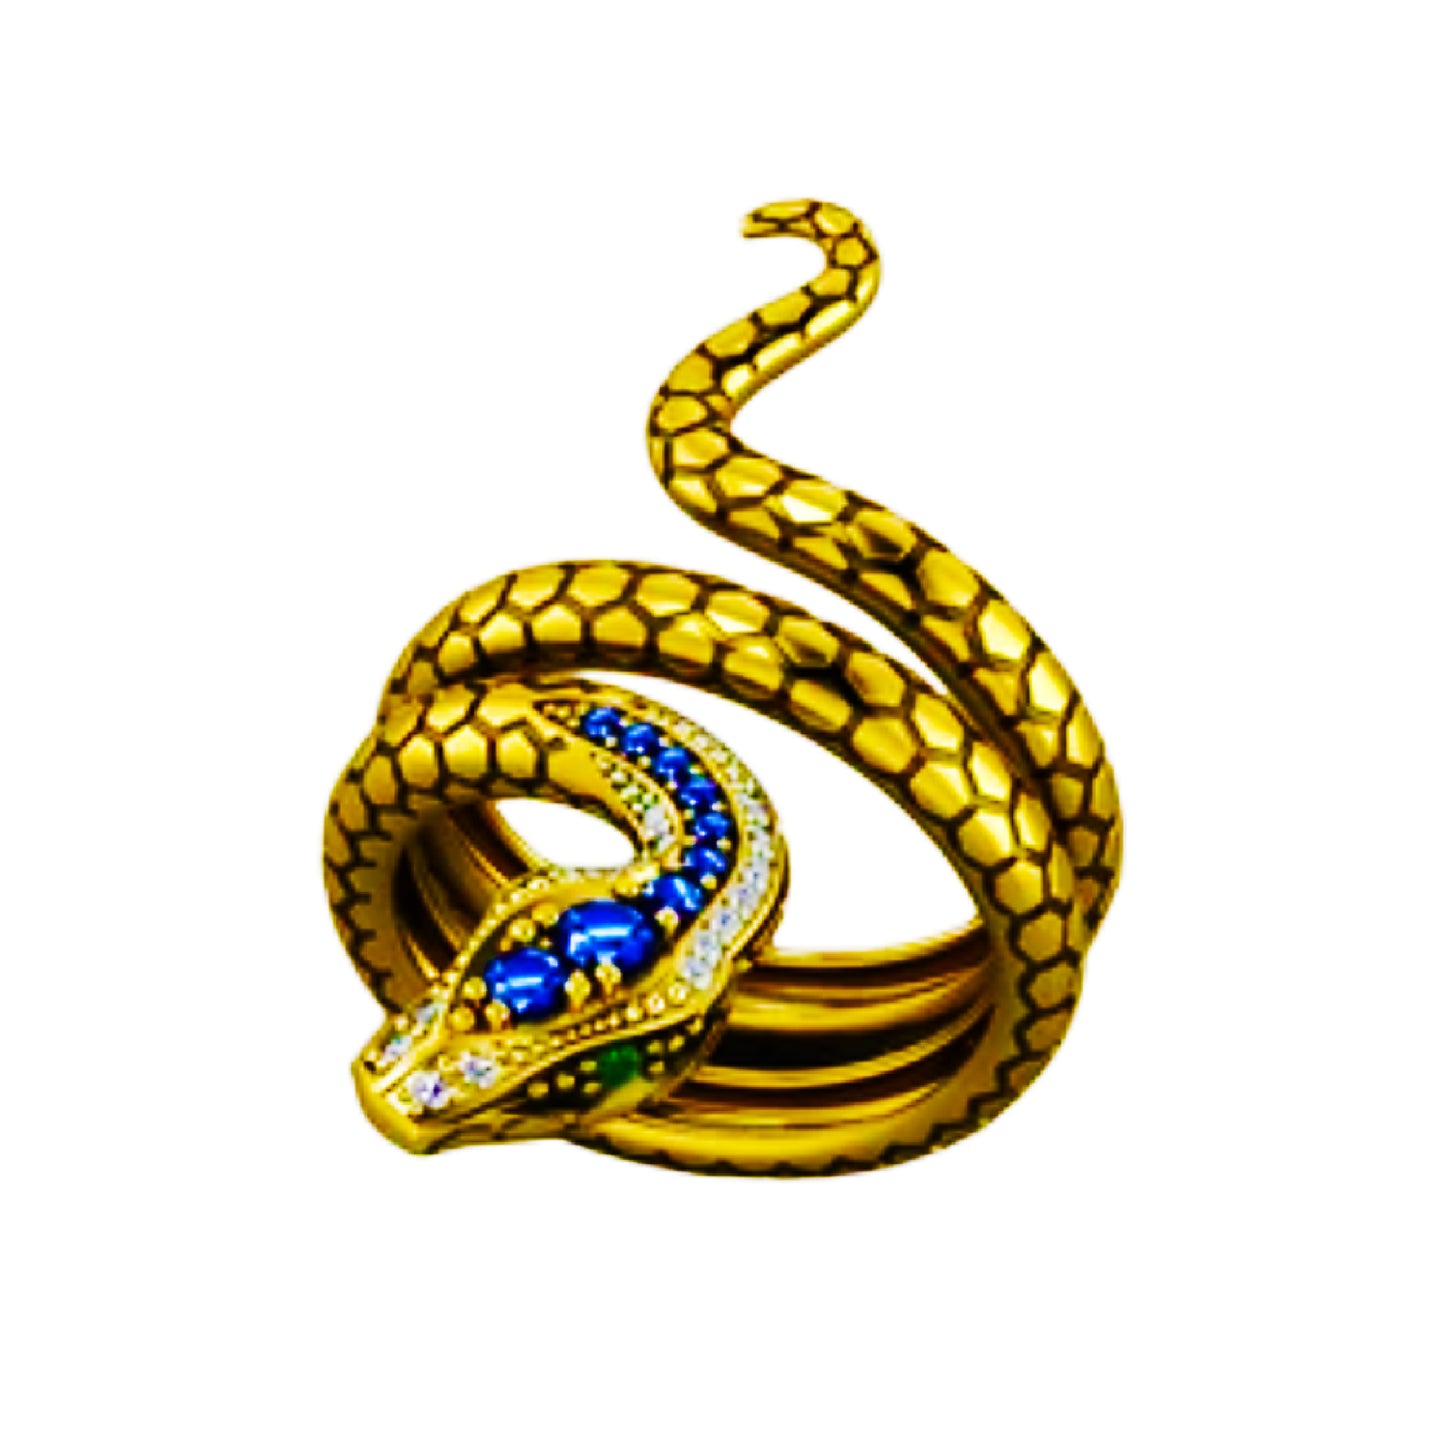 Copy of Snake Ring Green Gem Rhinestone Adjustable Size Alloy Gold Colour Jewellery